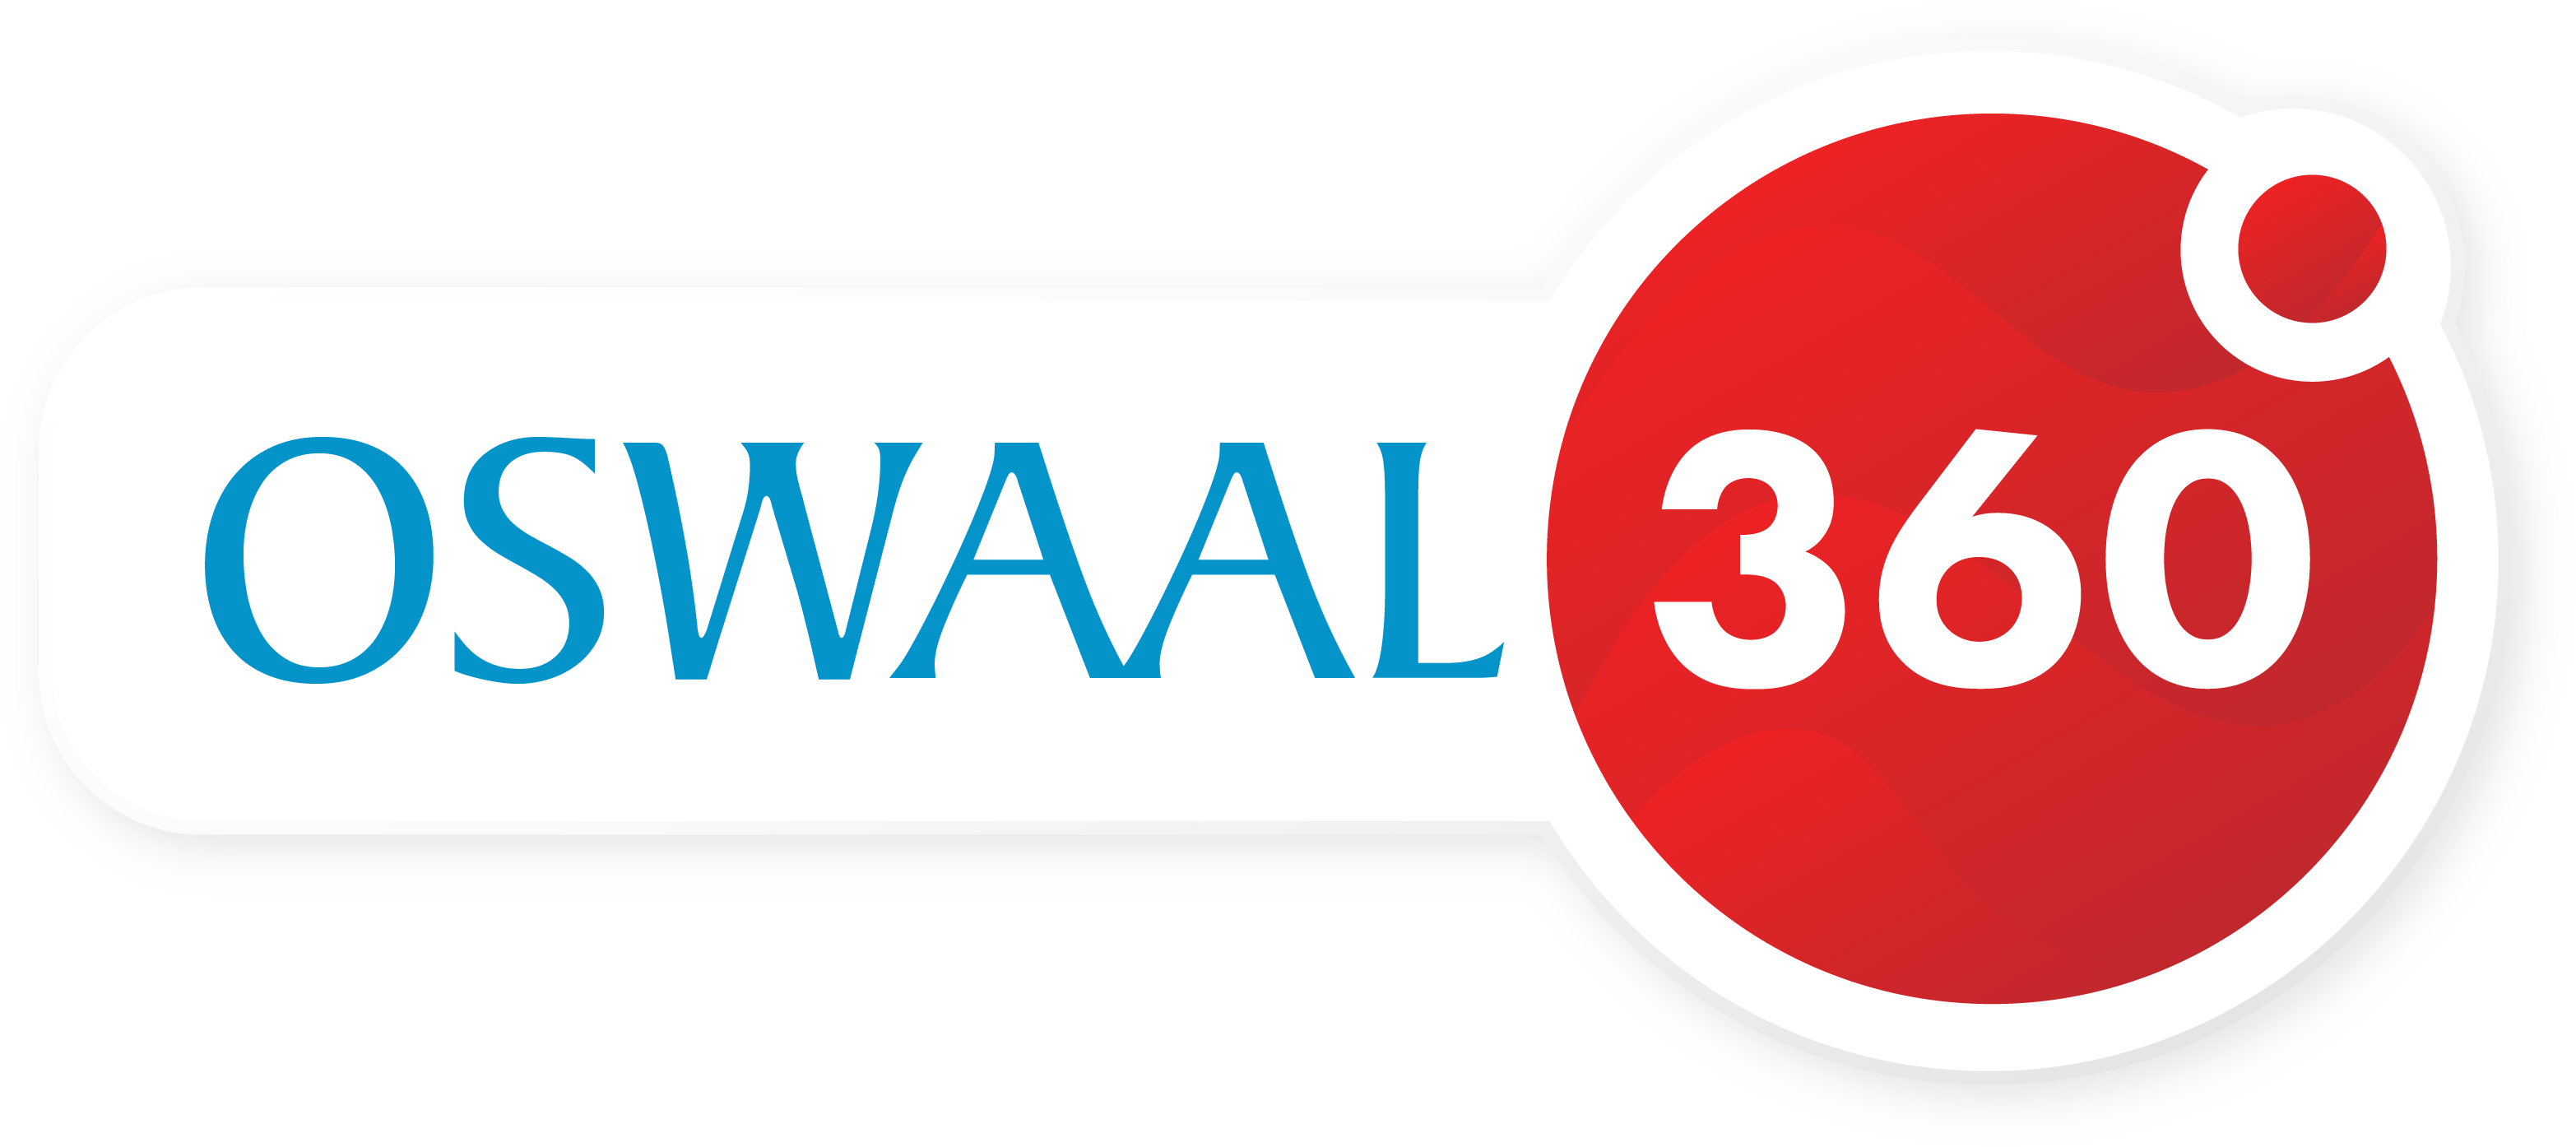 Oswaal 360: 10 Tips to Make Strategic Study Plan for CBSE Class 10 Boards 2025